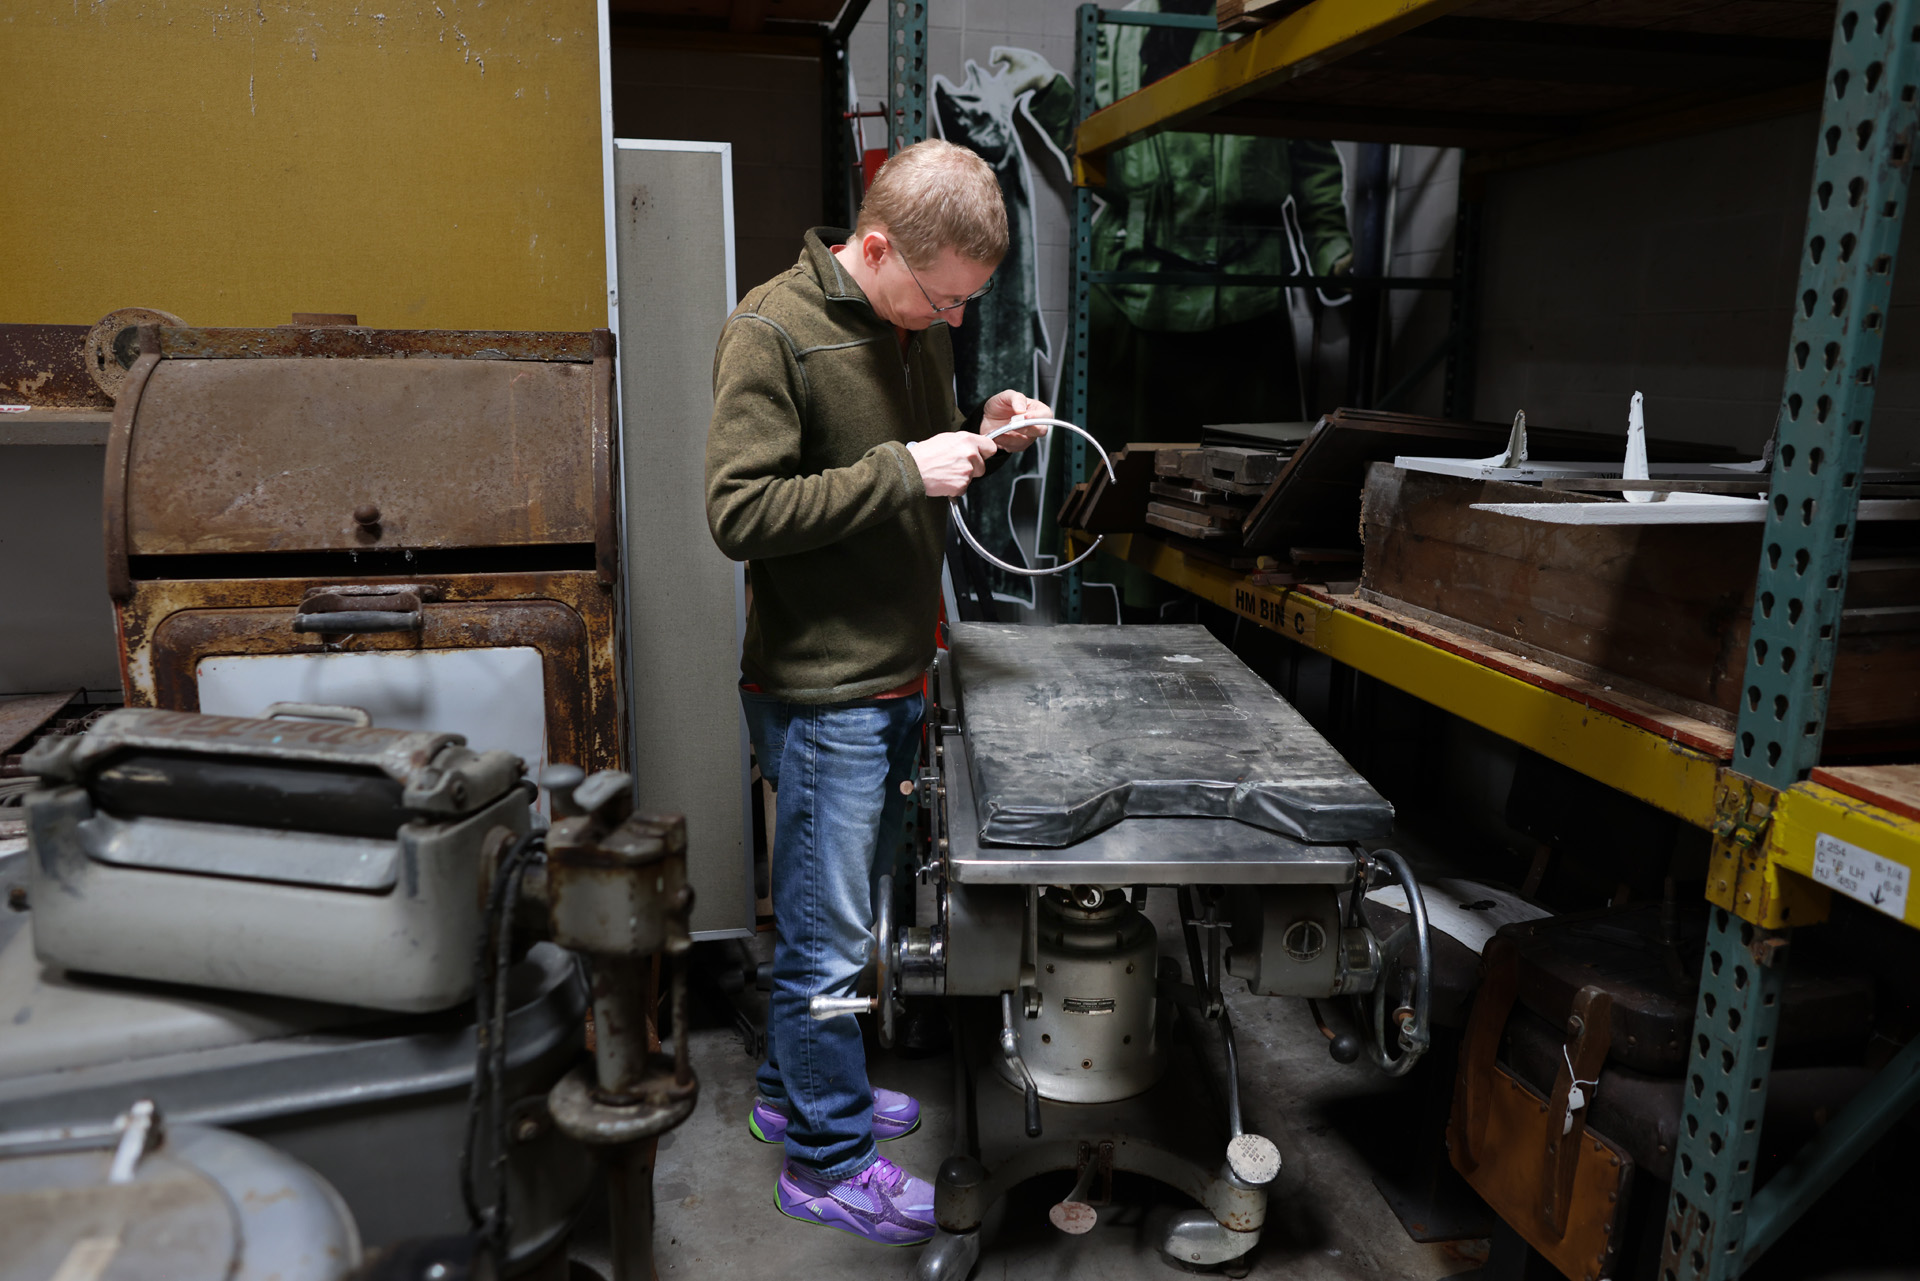 <p>Horne examines calipers found on an old operating table in the warehouse of the Sedro-Woolley Museum. (Karen Ducey / The Seattle Times)</p>
